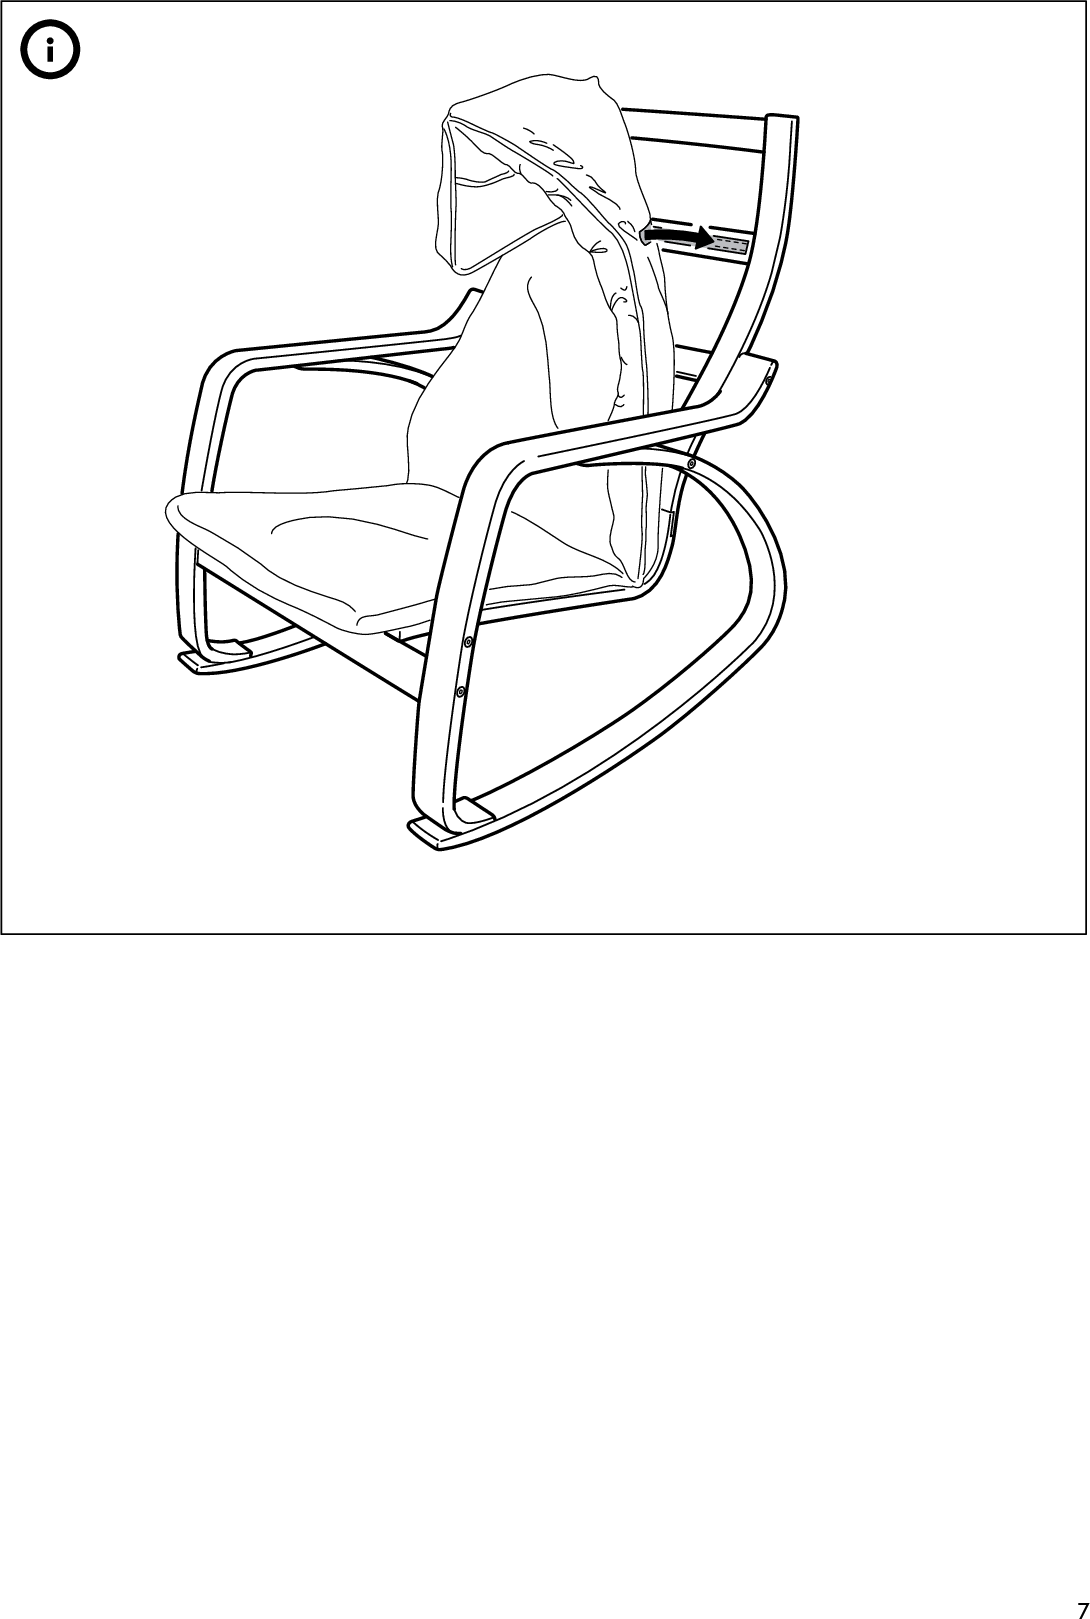 Page 8 of 8 - Ikea Ikea-Poang-Rocking-Chair-Frame-Assembly-Instruction